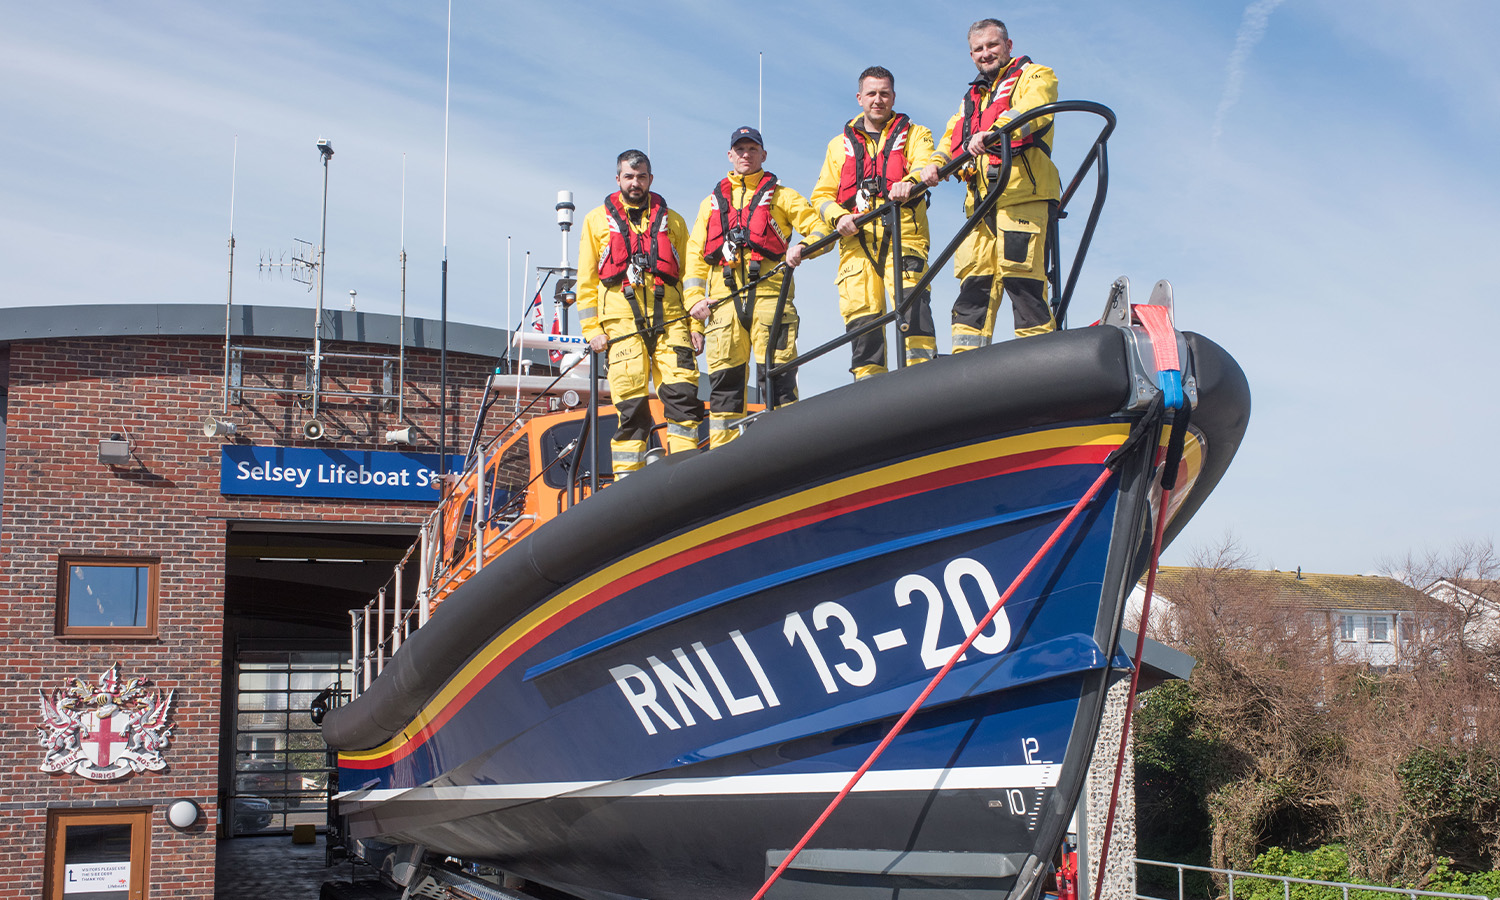 RNLI Selsey Lifeboat Station was awarded £100,000 from Postcode Community Trust thanks to players of People's Postcode Lottery